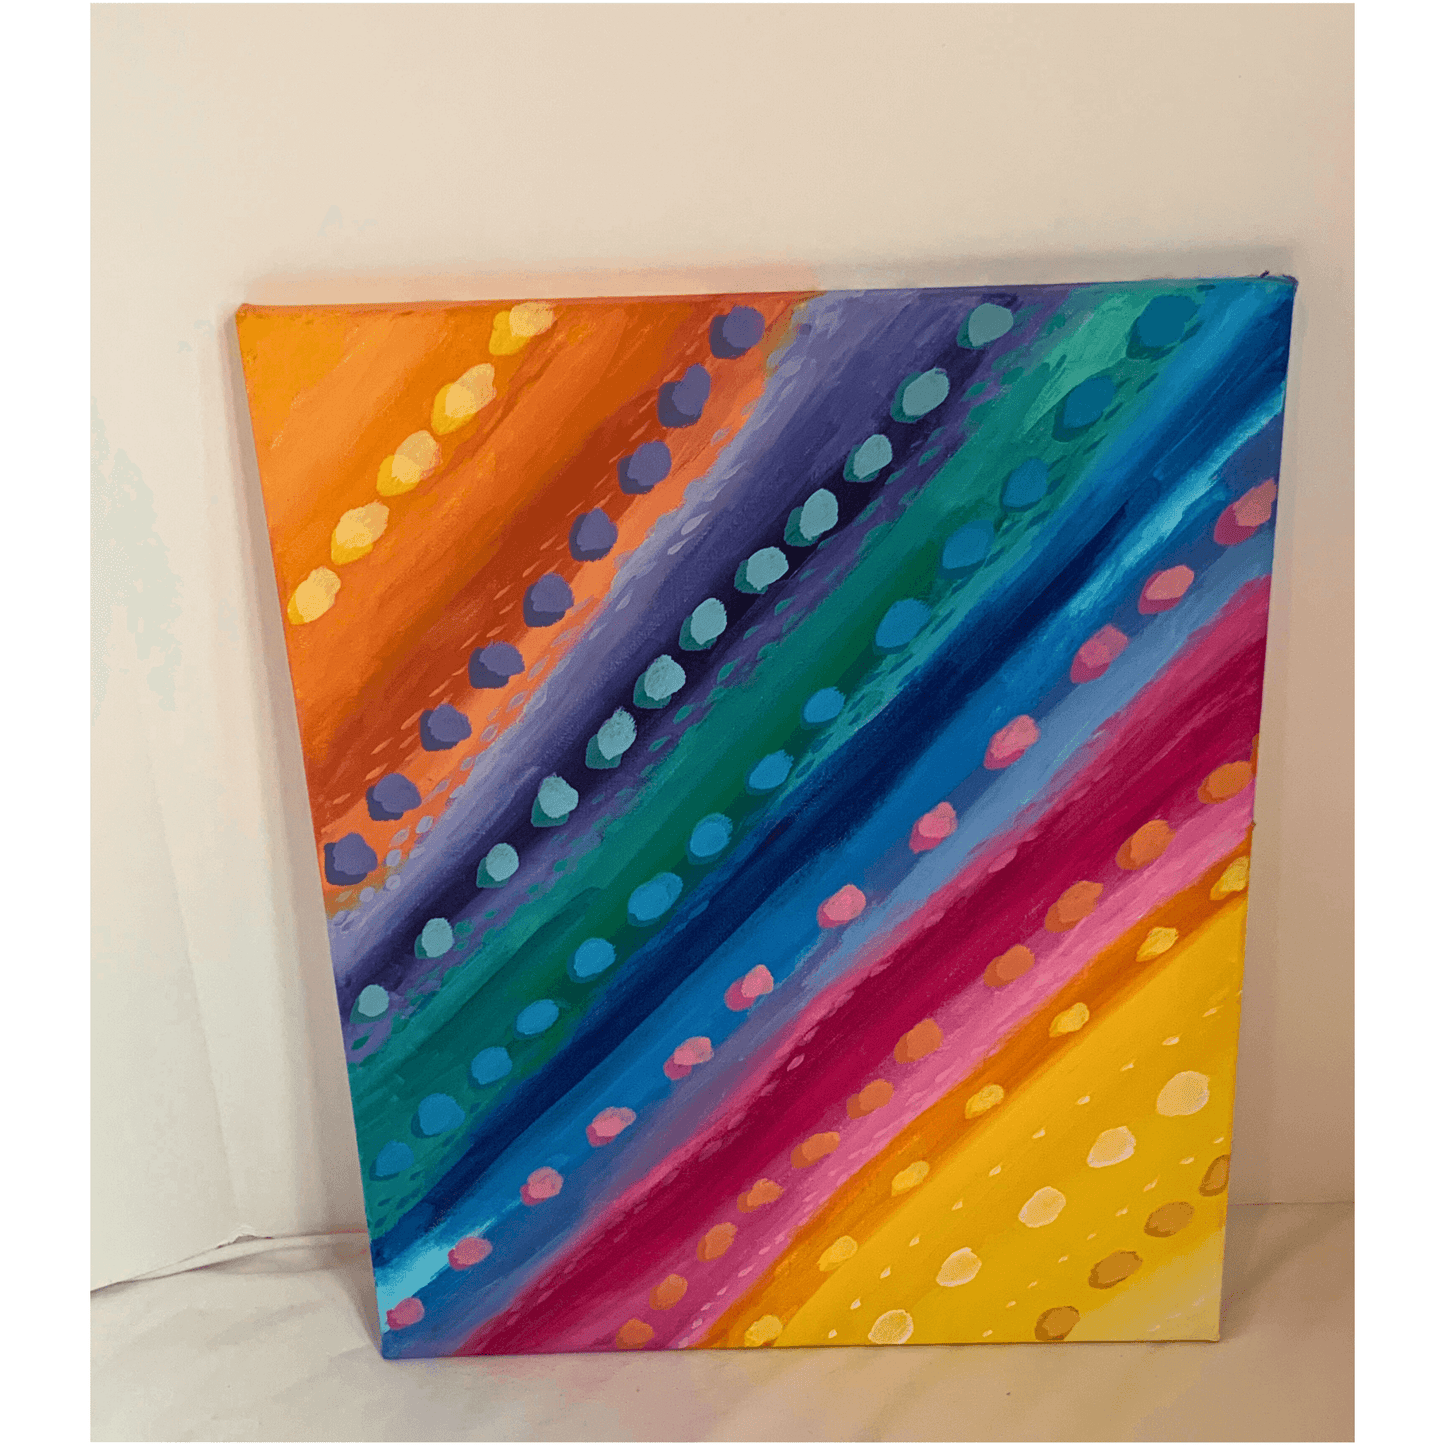 "MAKE YOUR MARK" Colorful Abstract Acrylic Painting on 16x20 inch Canvas